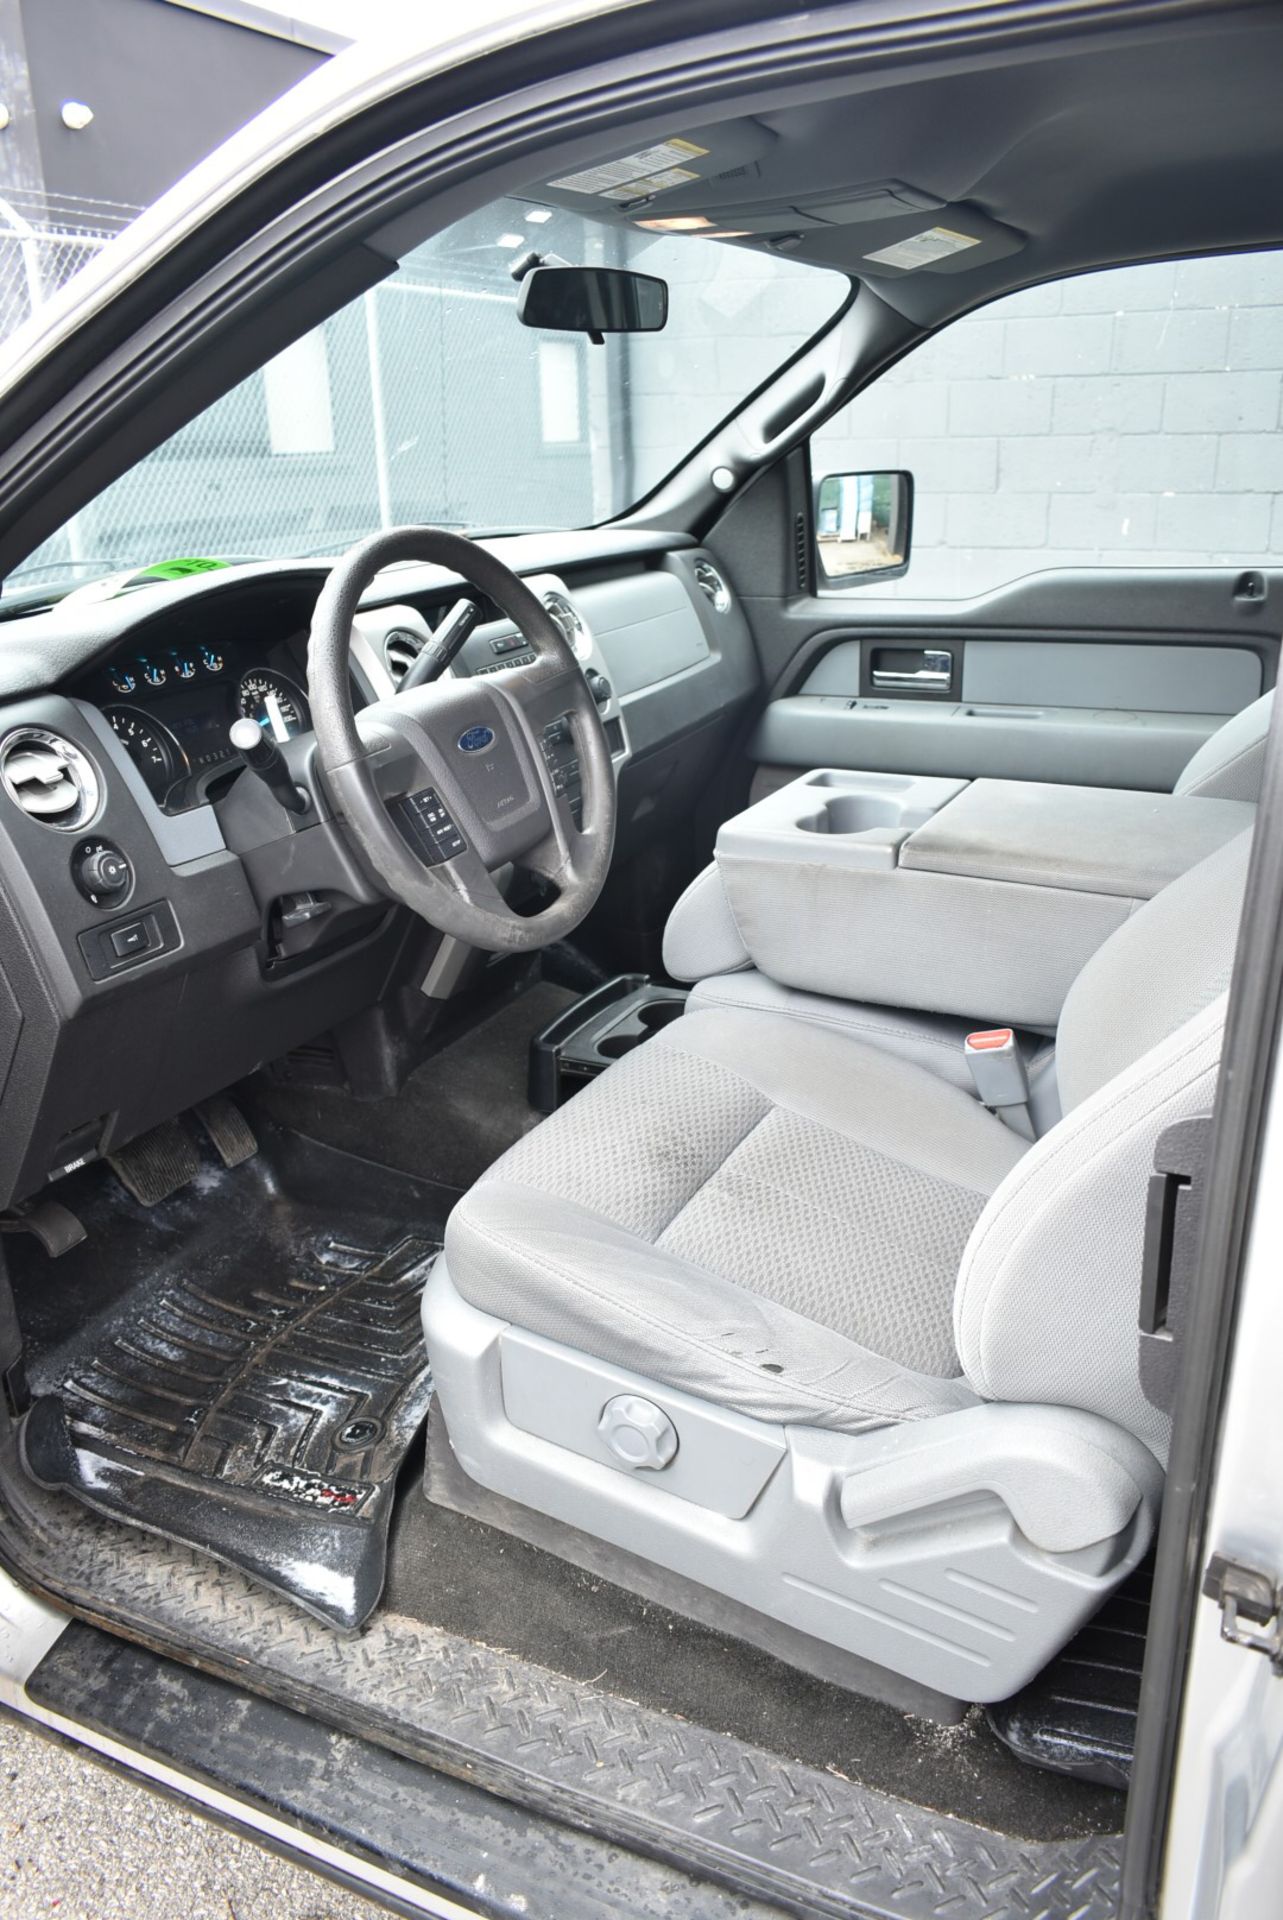 FORD (2014) F150XLT EXTENDED CAB PICKUP TRUCK WITH 3.7 LITER V6 ENGINE, 4X4, AUTO TRANSMISSION, - Image 7 of 13